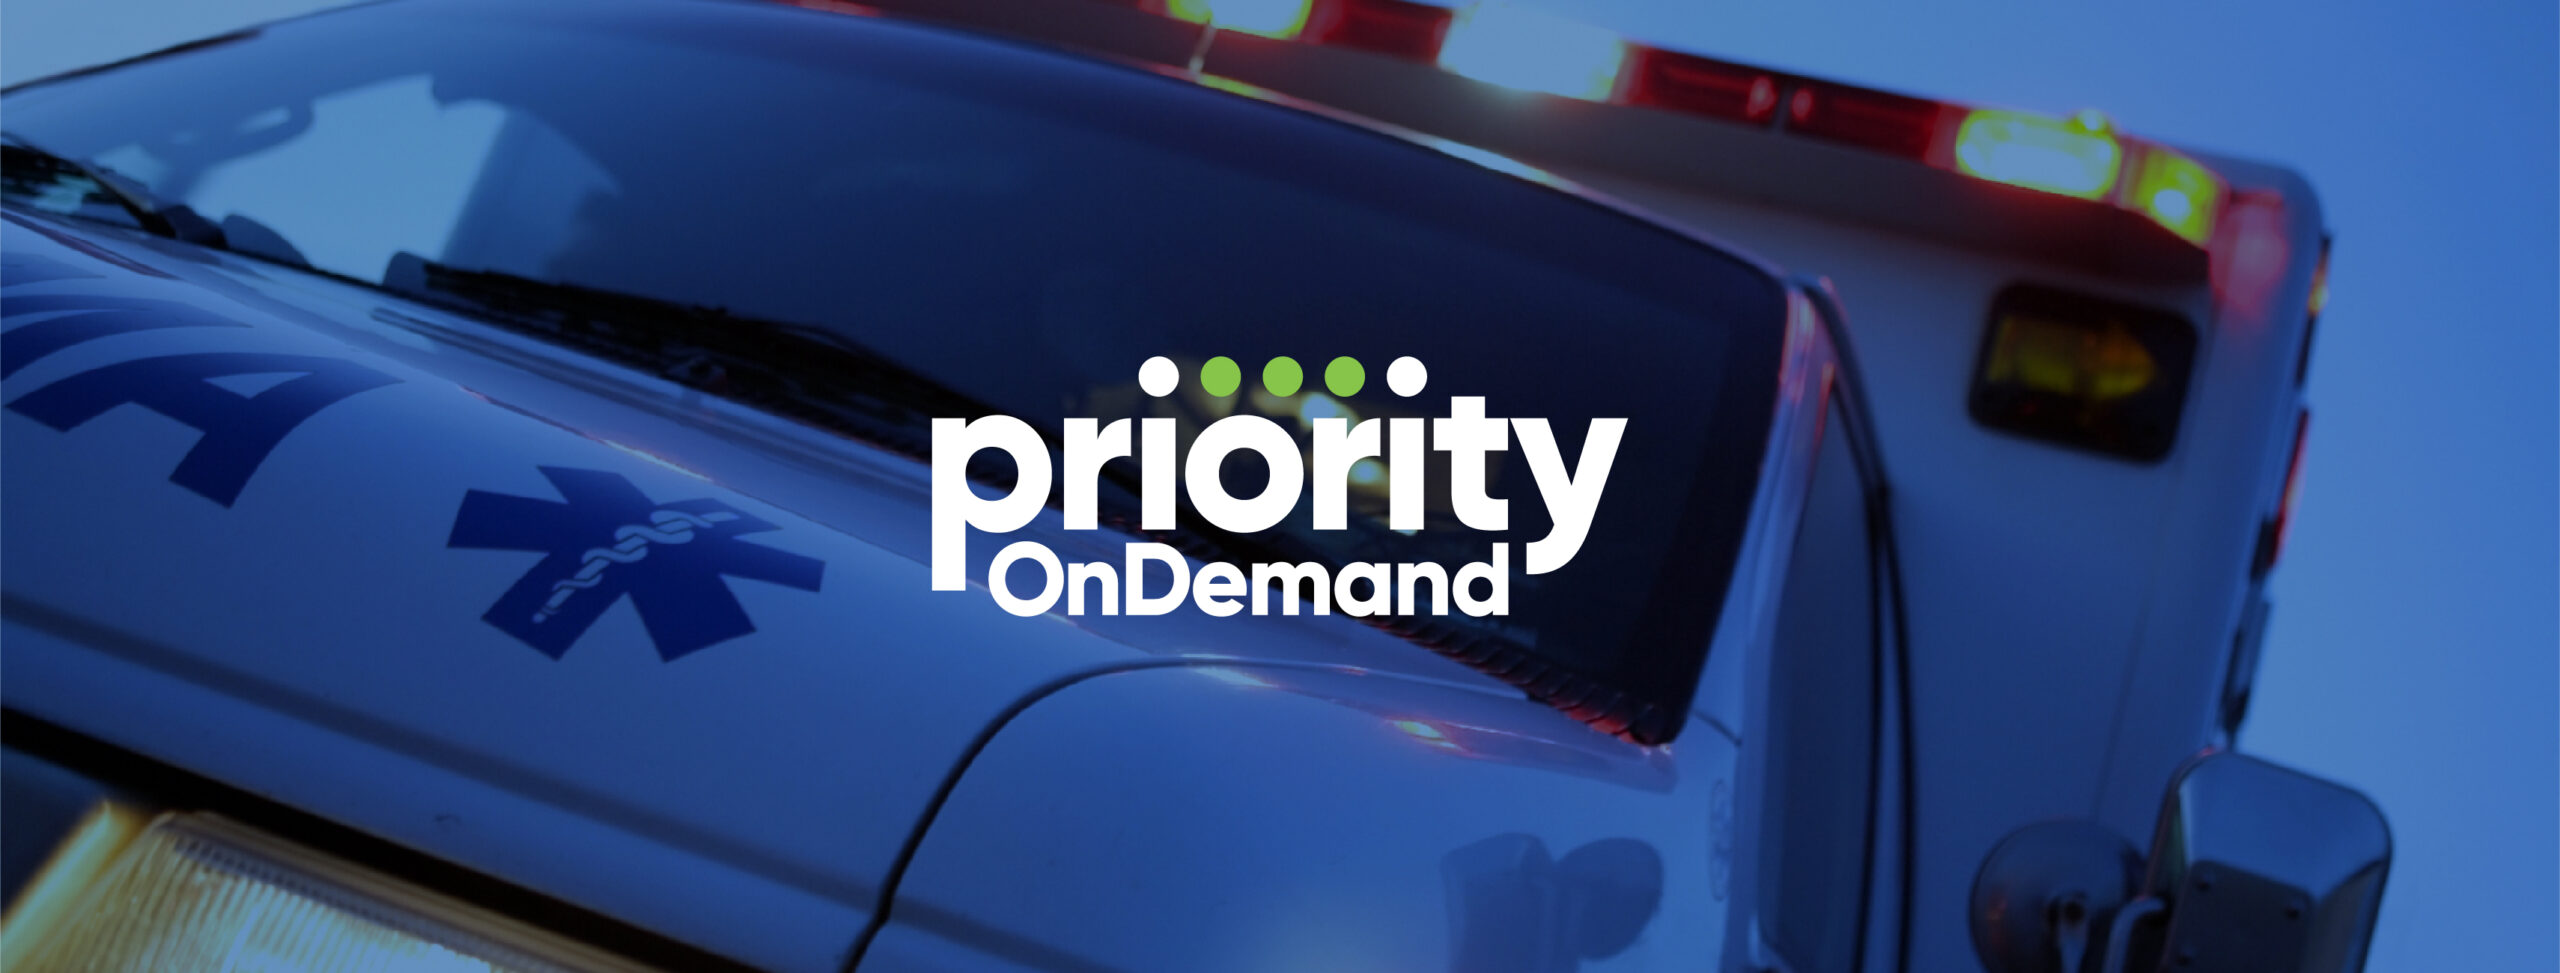 Featured image for “Priority Ambulance adds telehealth solutions, rebrands parent company as Priority OnDemand”